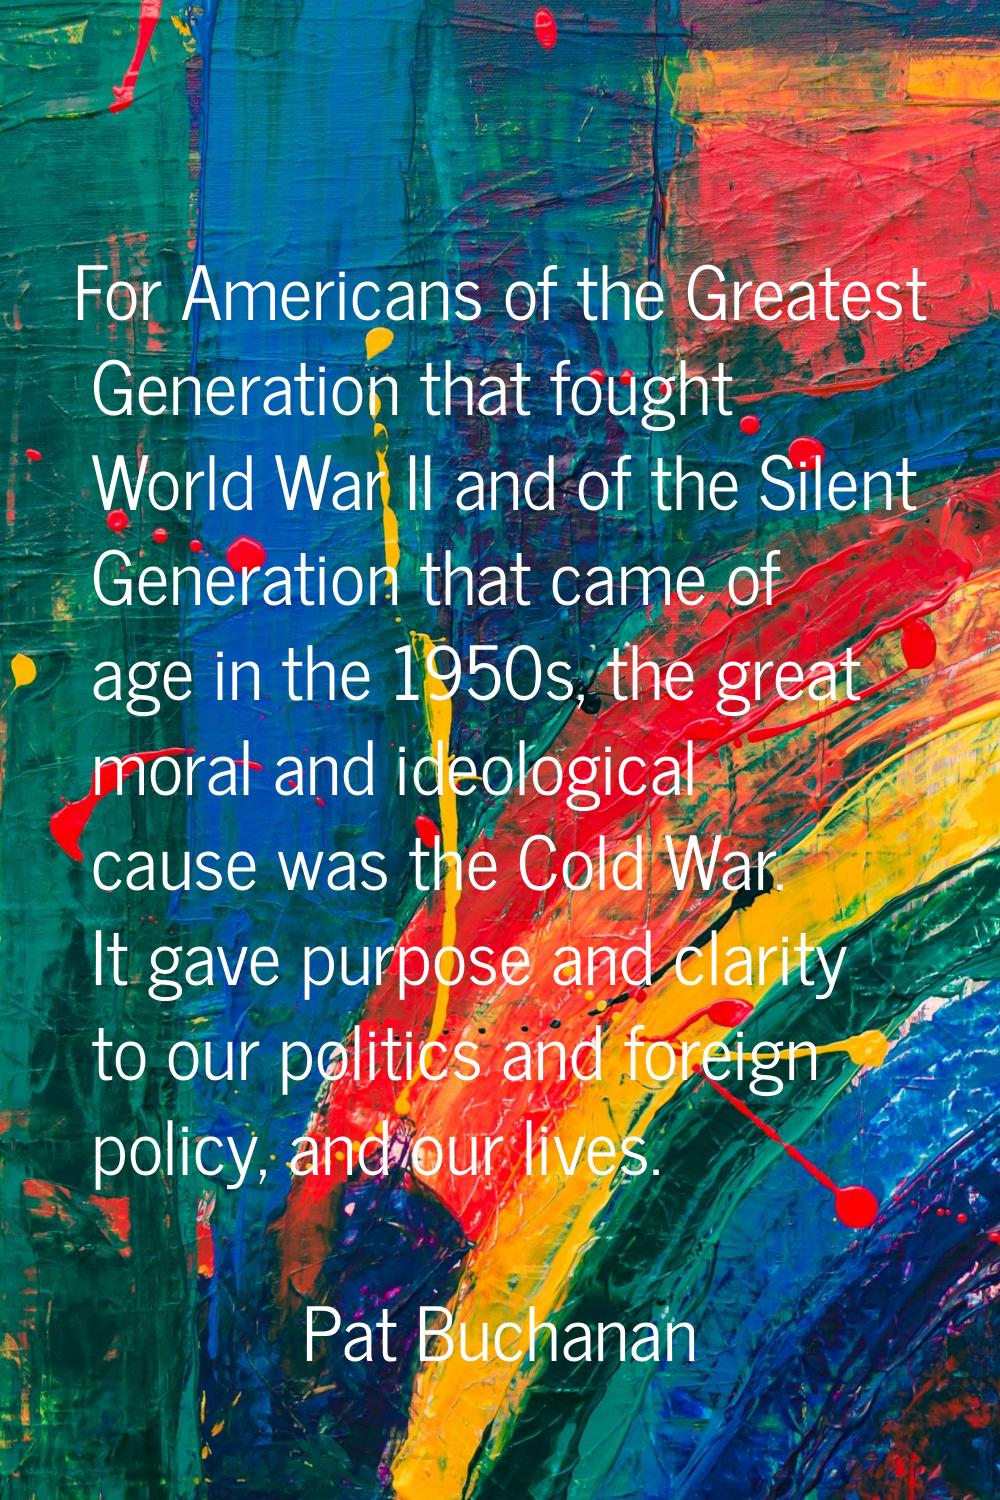 For Americans of the Greatest Generation that fought World War II and of the Silent Generation that